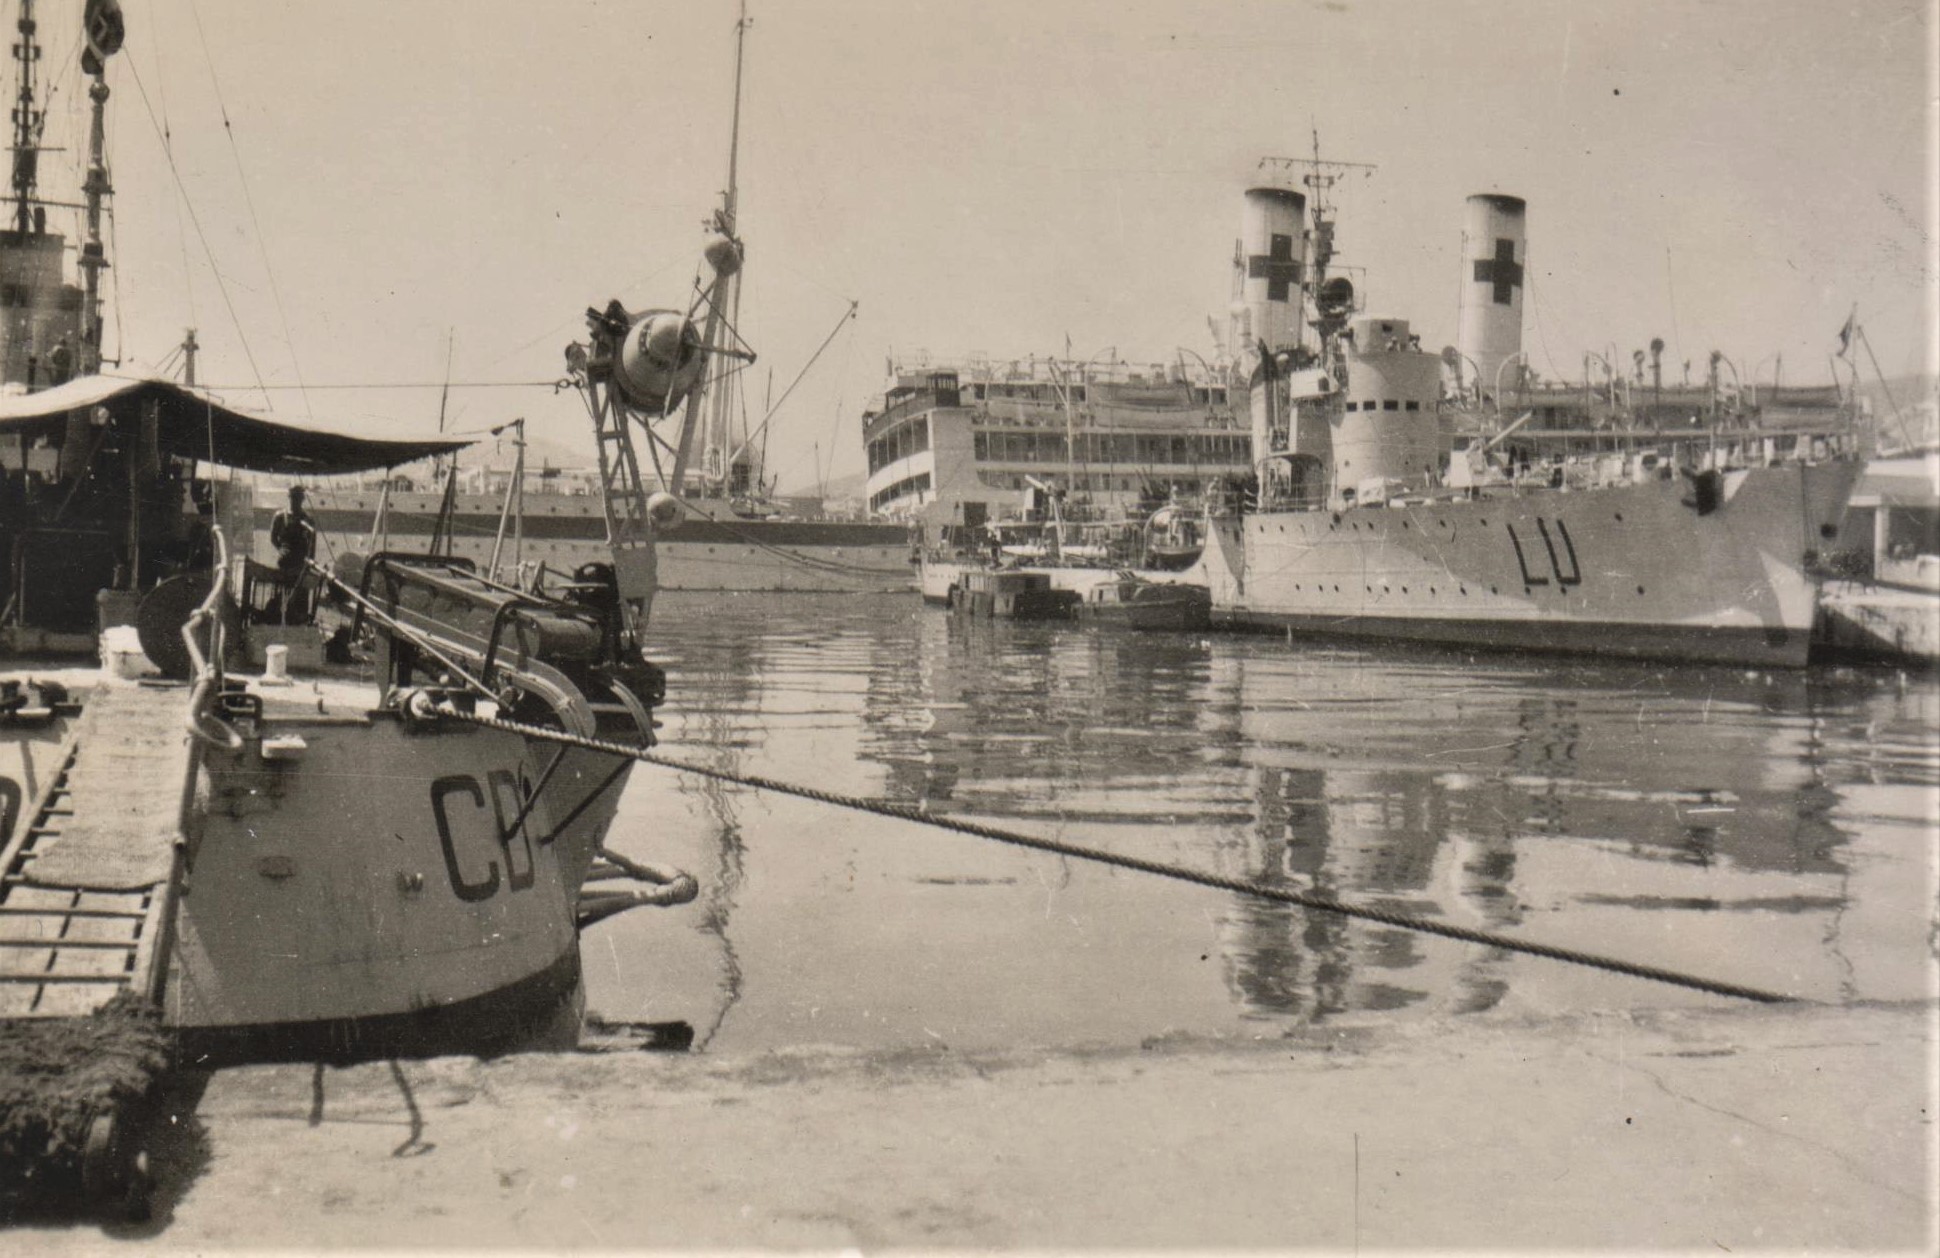 Hospital ship Gradisca, torpedo boat Lupo and torpedo boat Castelfidardo in Pireus Harbour in May 1941 (Author’s Collection)